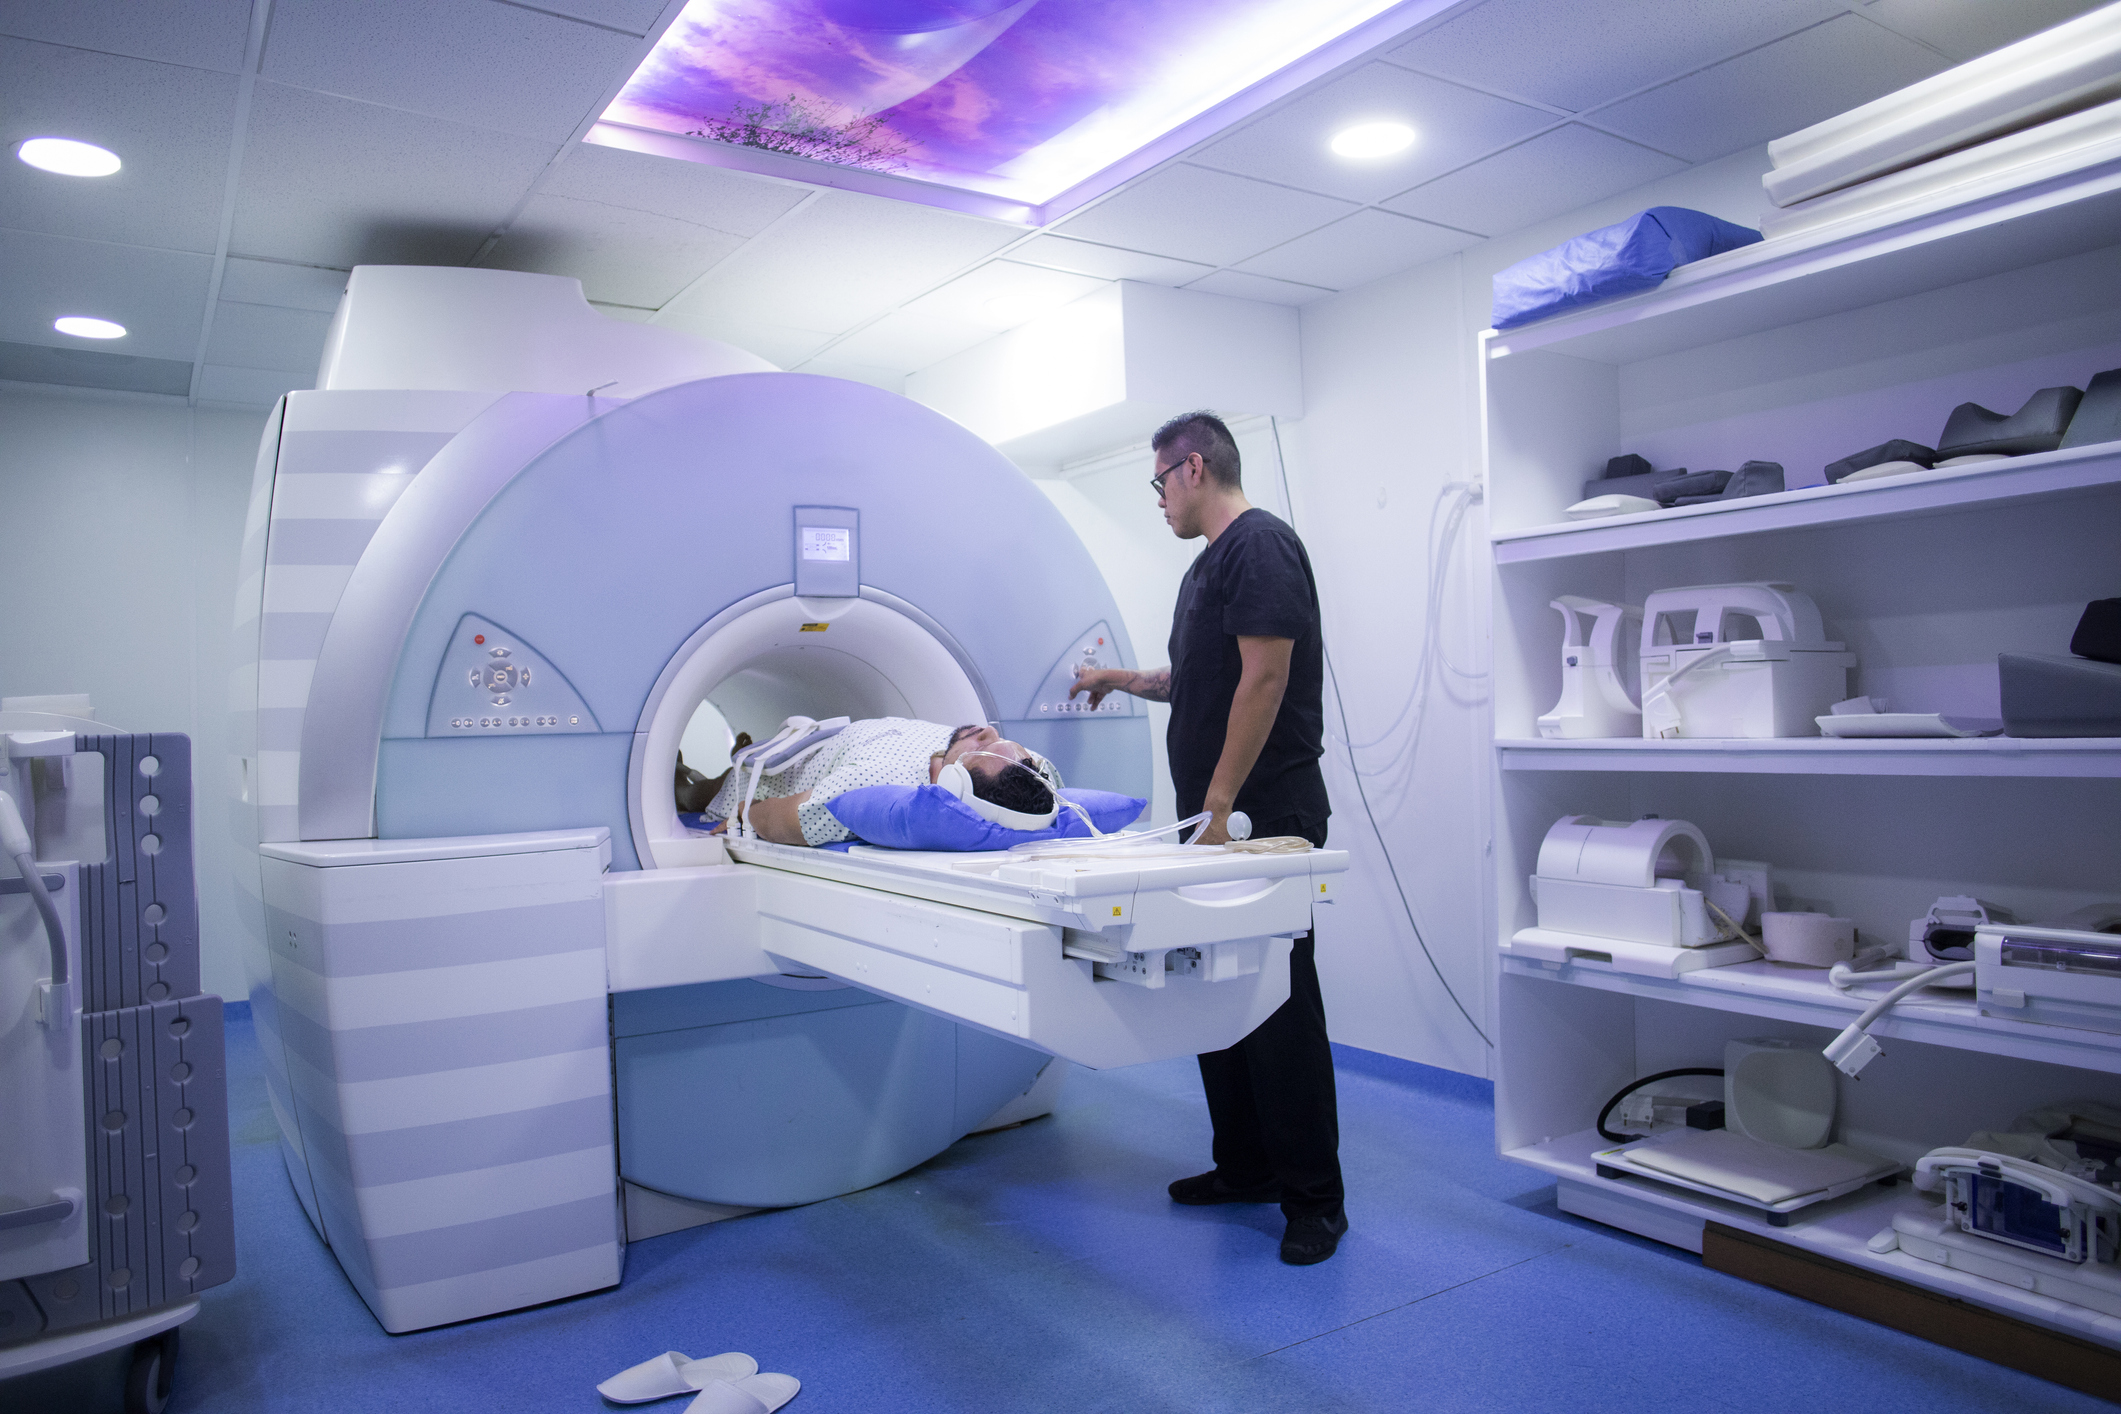 MRI First, when it comes to Screening for Prostate Cancer